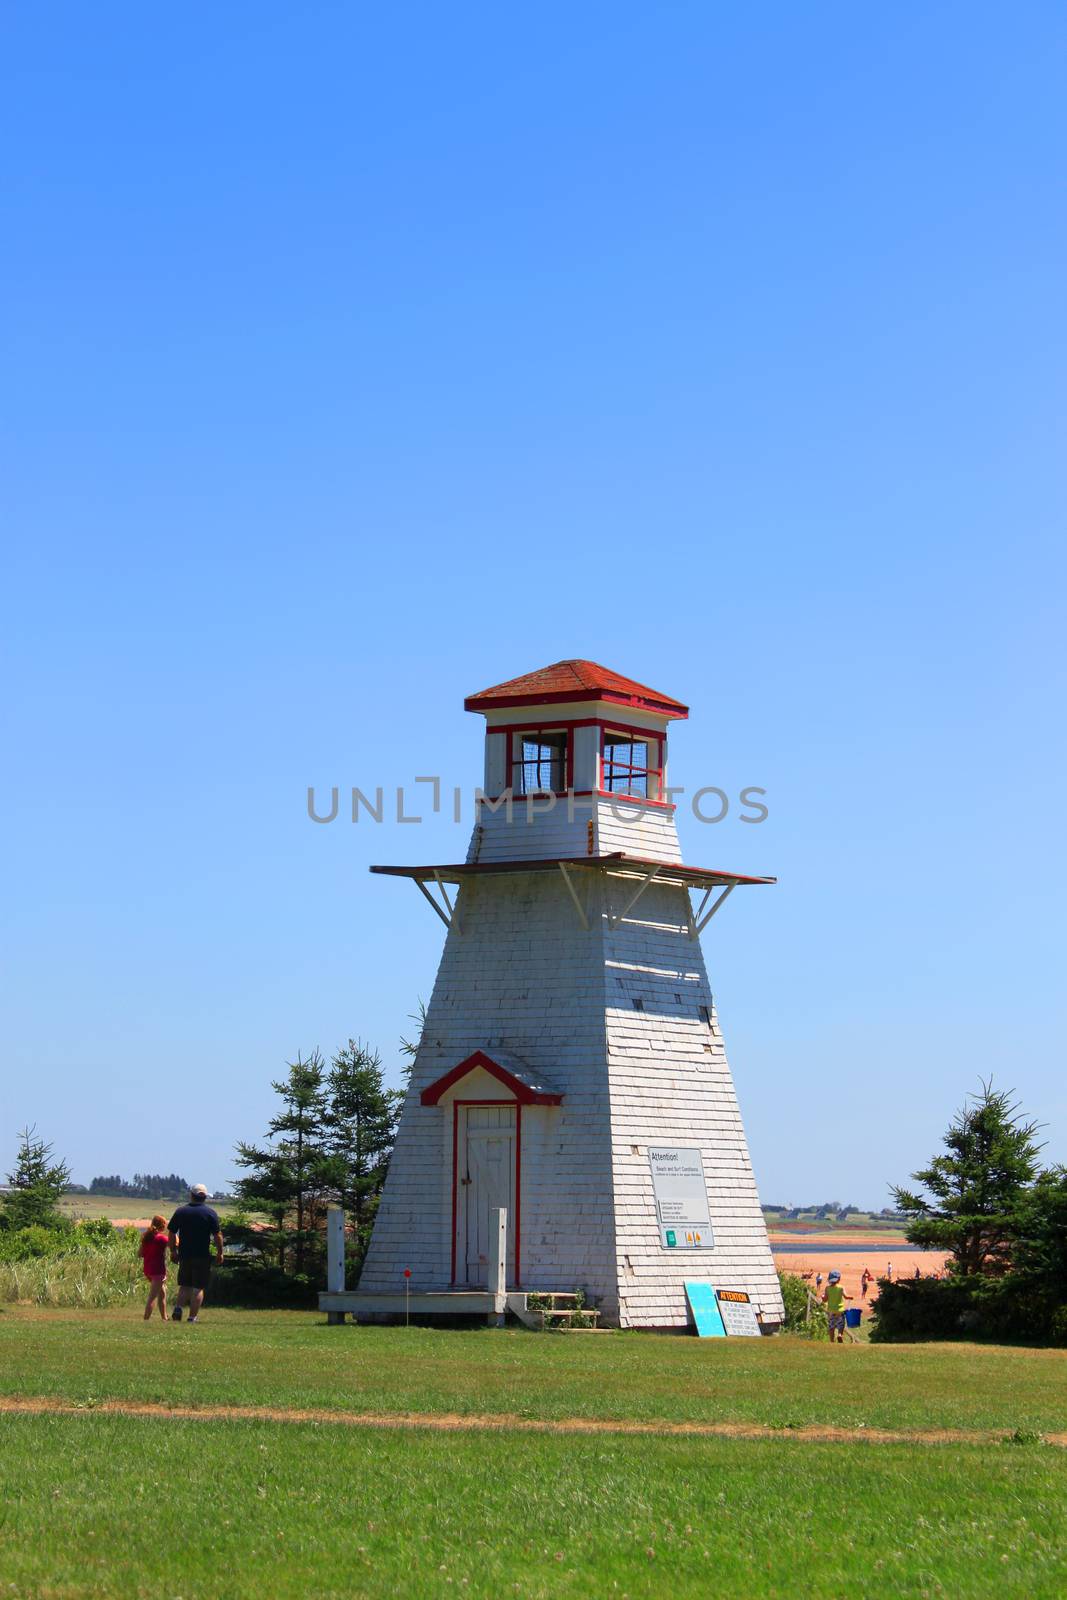 Lighthouse at Cabot Beach with beachgoers in Prince Edward Island, Canada